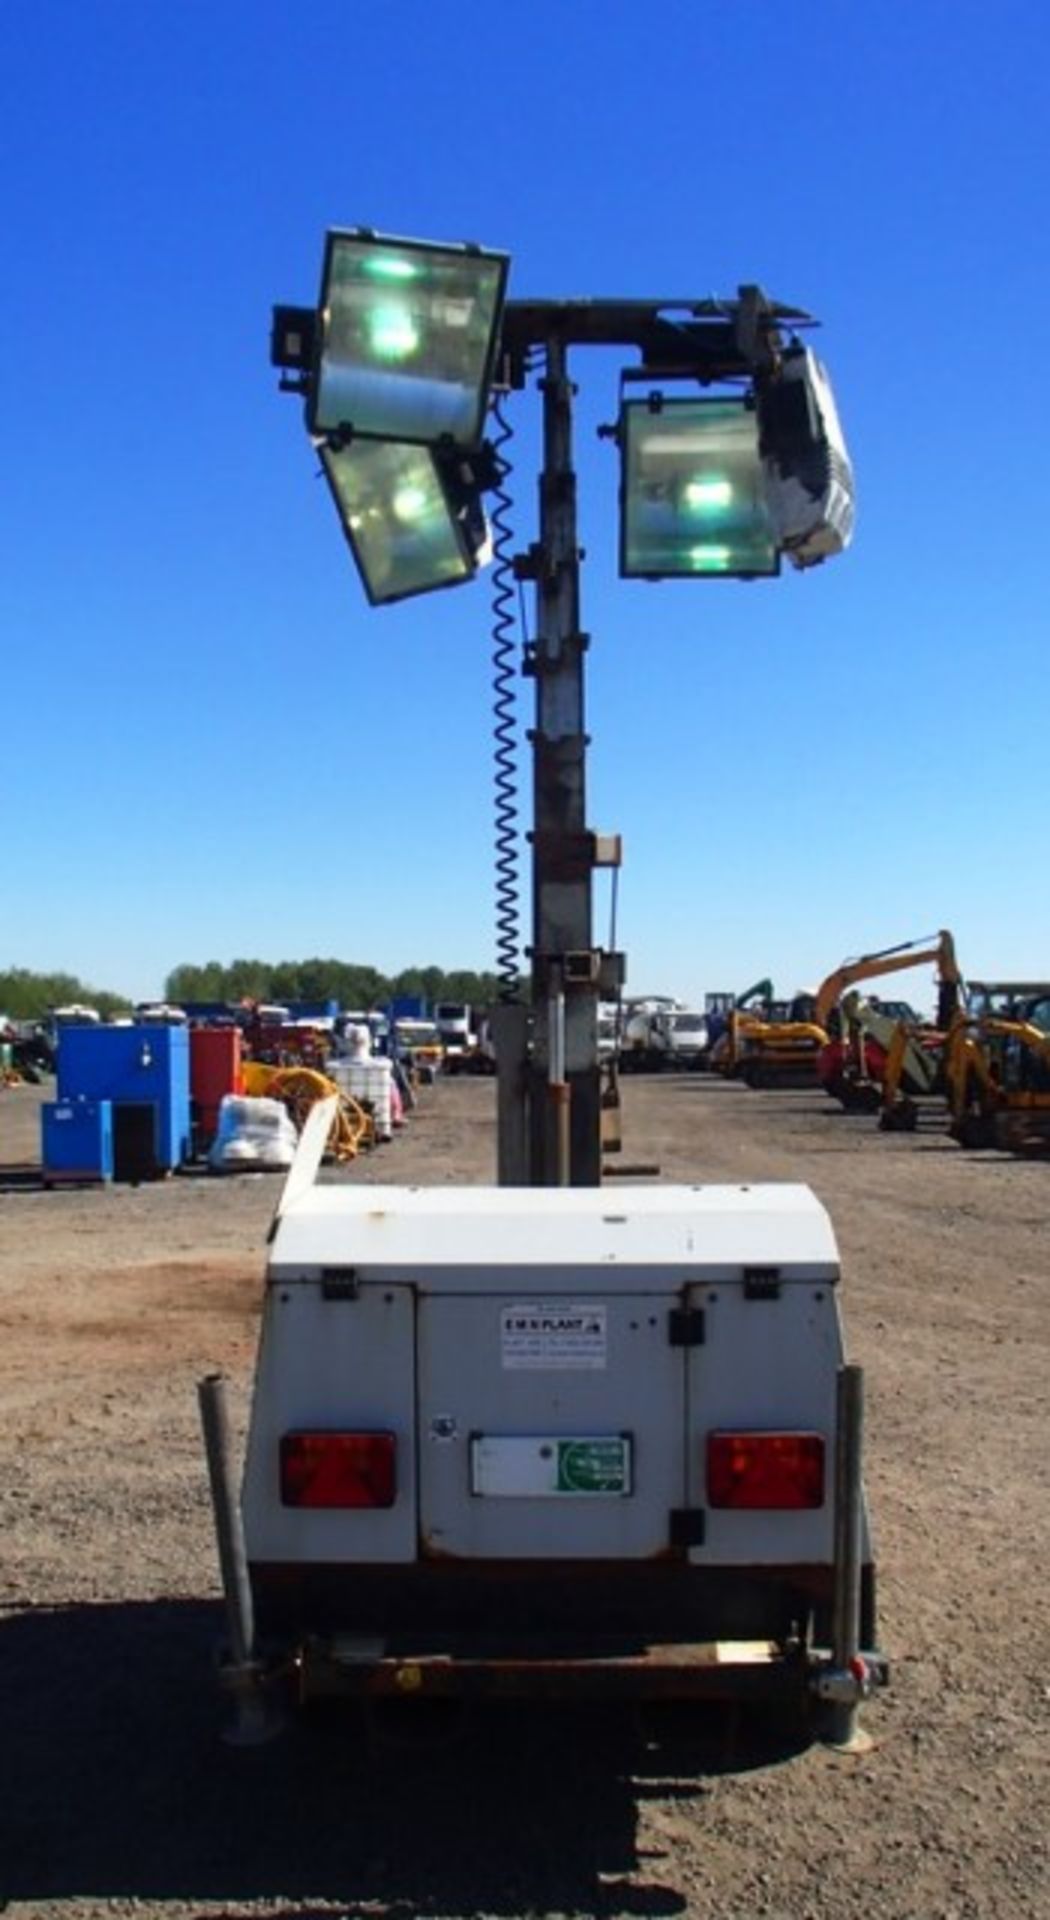 2010 SMC TL-90. SN T90108713 TOWABLE TOWER LIGHTS, ENGINE POWER 7.7KW @ 1500RPM. 992 HRS (NOT VERIFI - Image 3 of 6